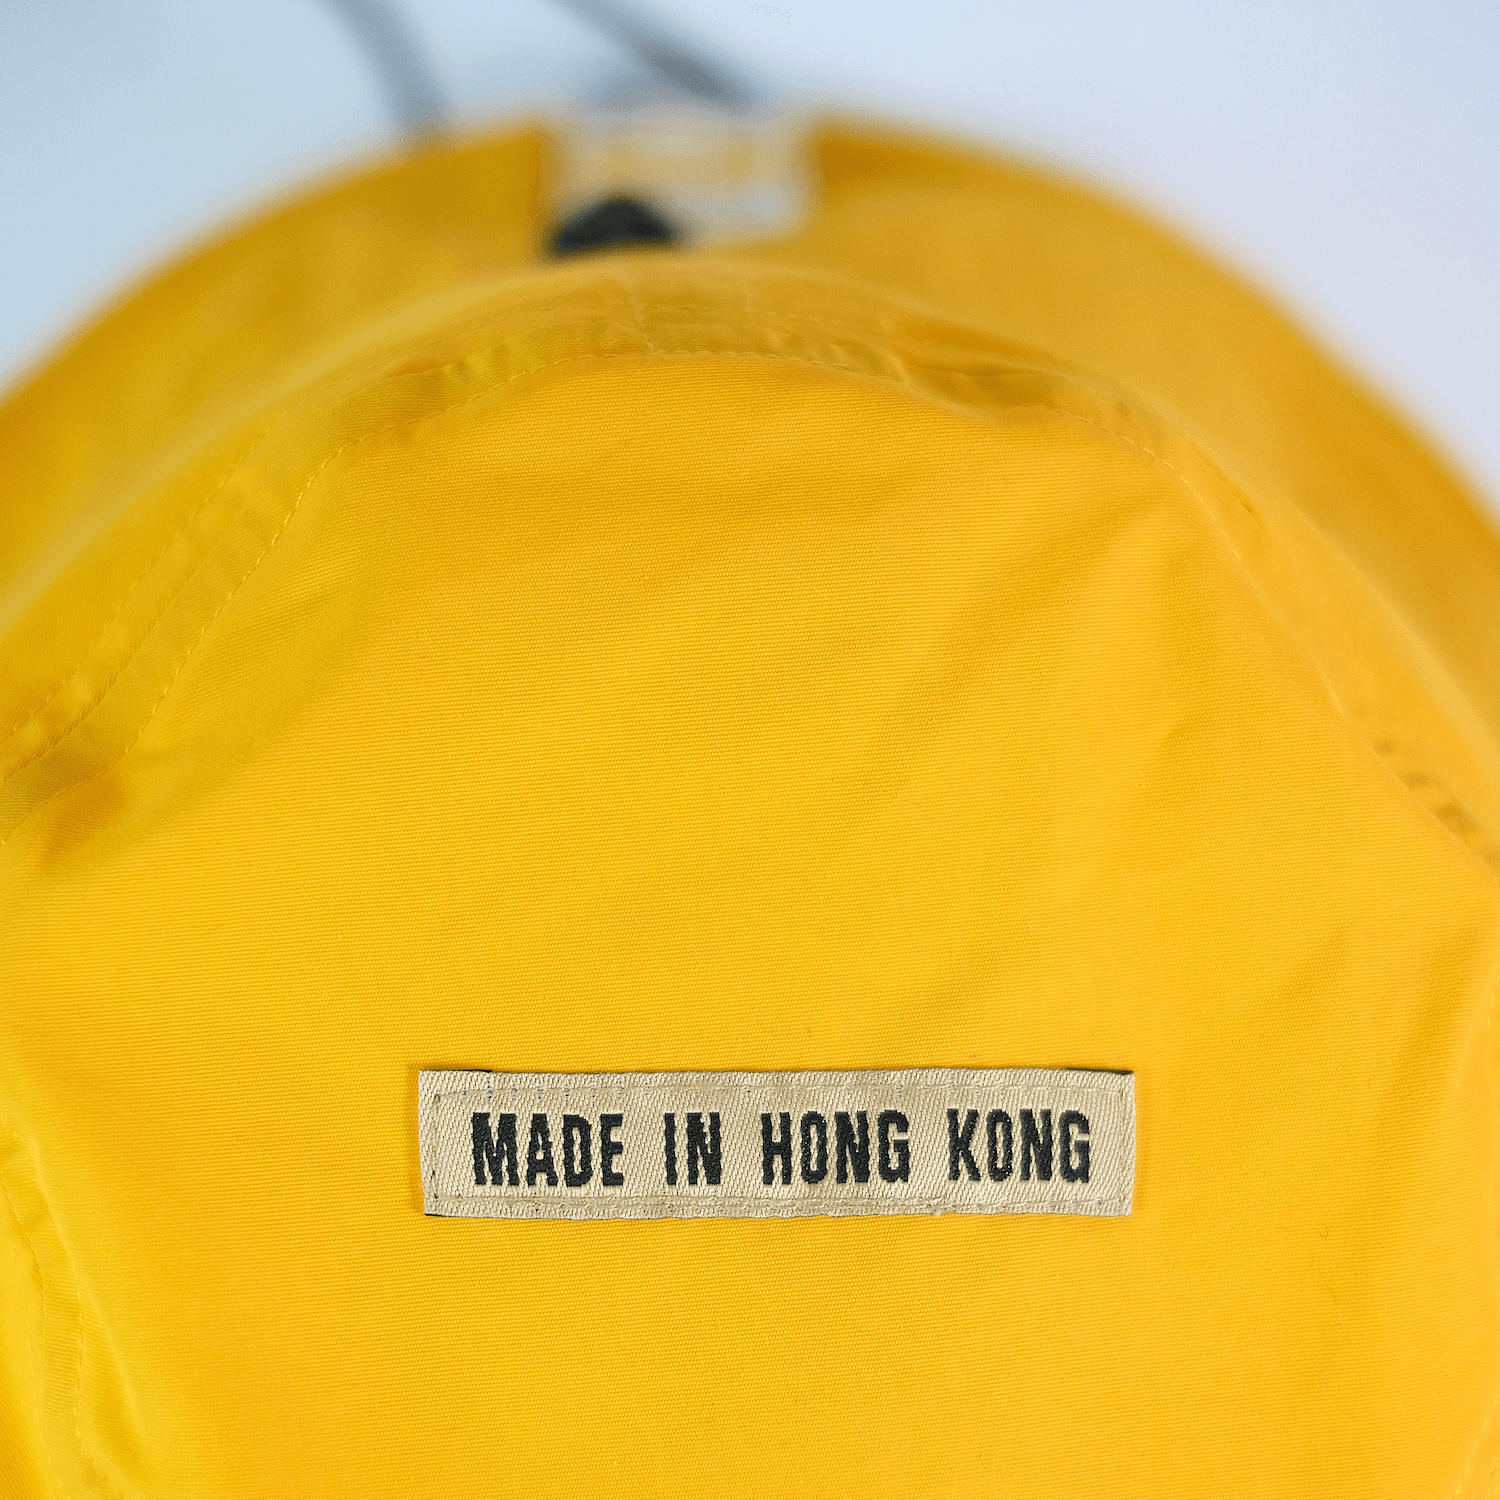 Fisher Hat (Yellow) - A Yellow Object